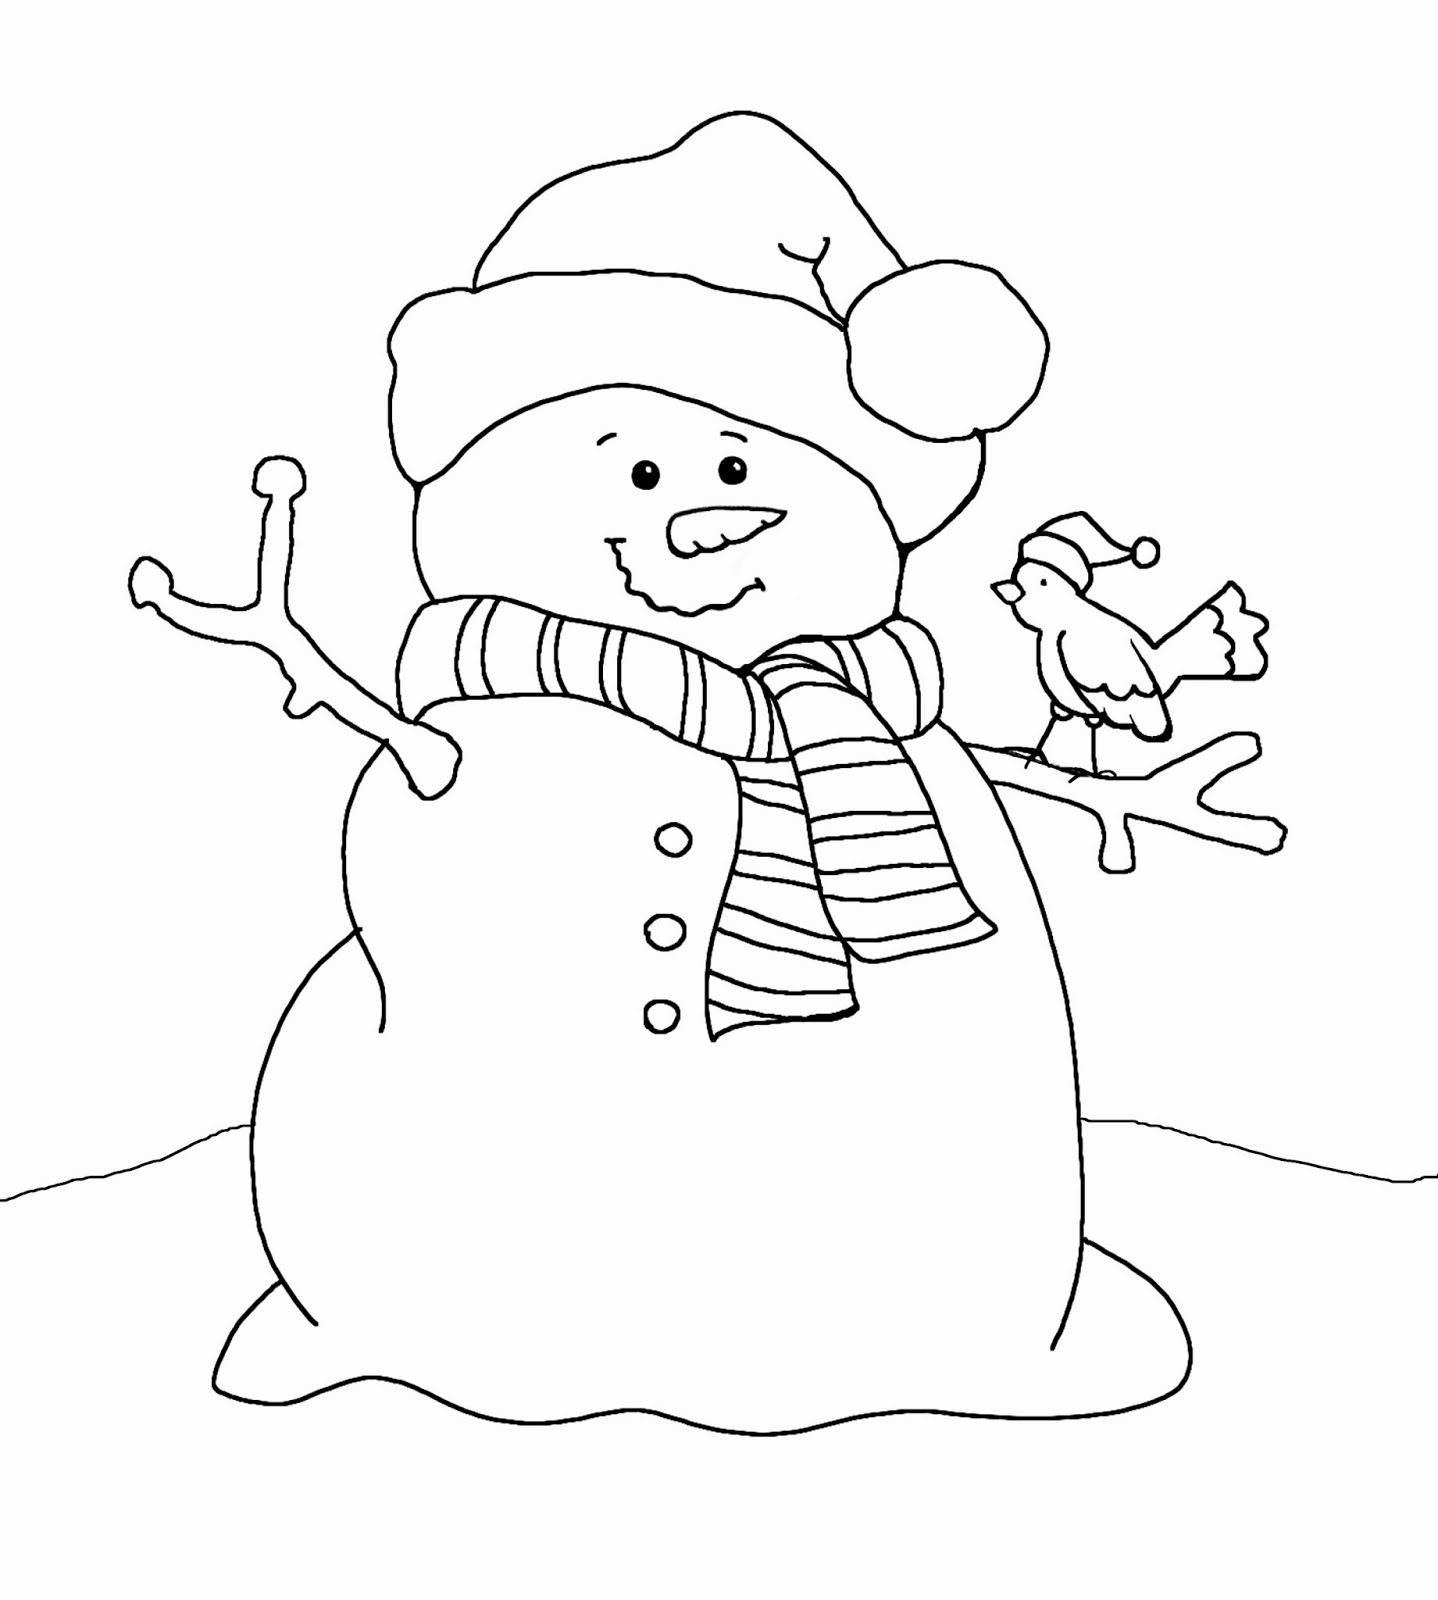 Cute Snowman Coloring Pages at GetColorings.com | Free printable ...